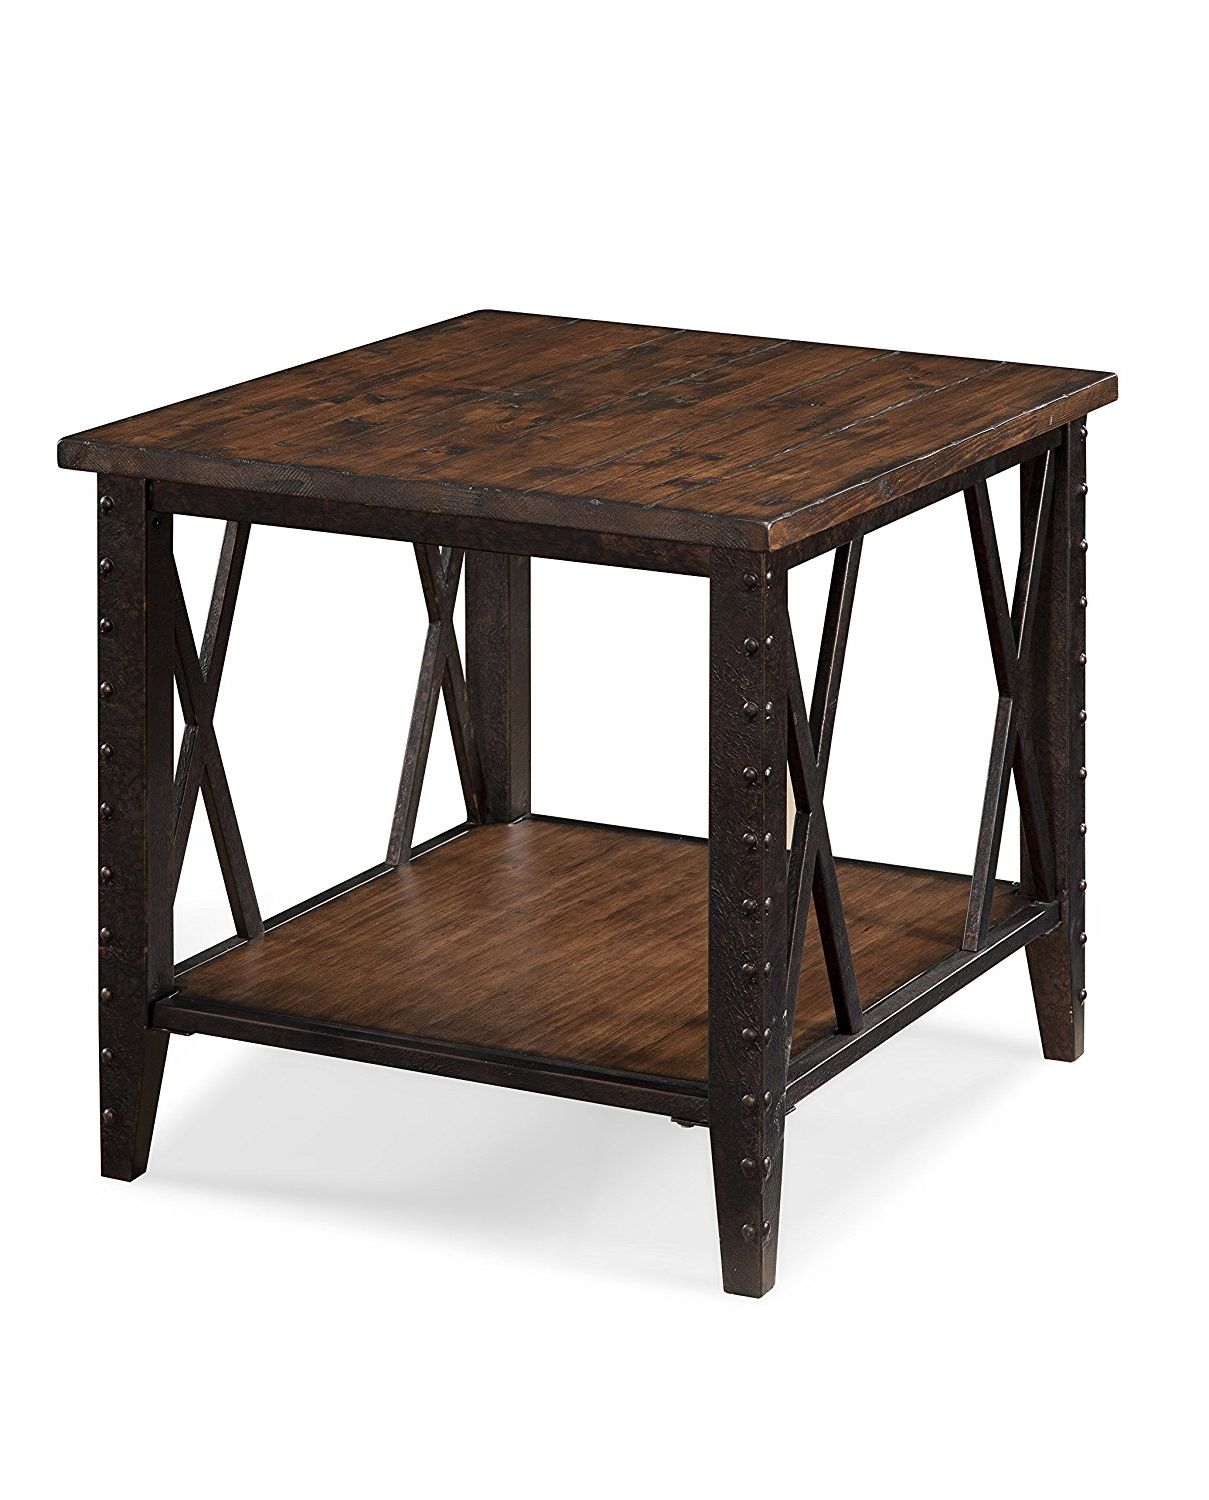 Popular Rectangular End Table Wood And Metal – Decor Ideas Throughout Wood And Steel Outdoor Side Tables (View 9 of 15)